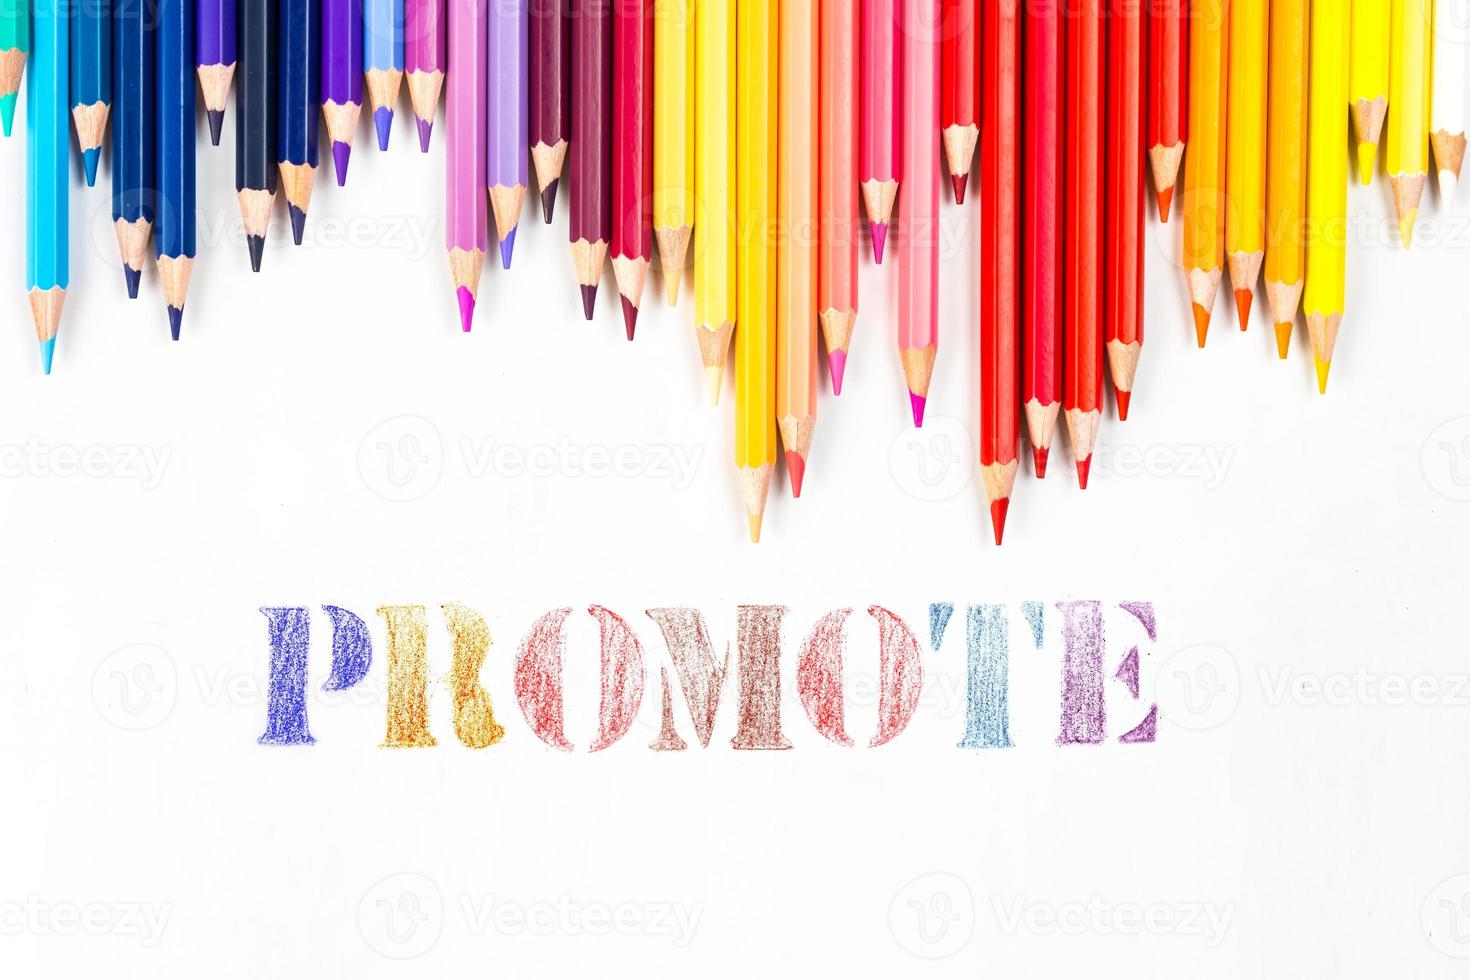 Multi-colored wooden sticks Wooden colouring pencils and Promote on white background photo